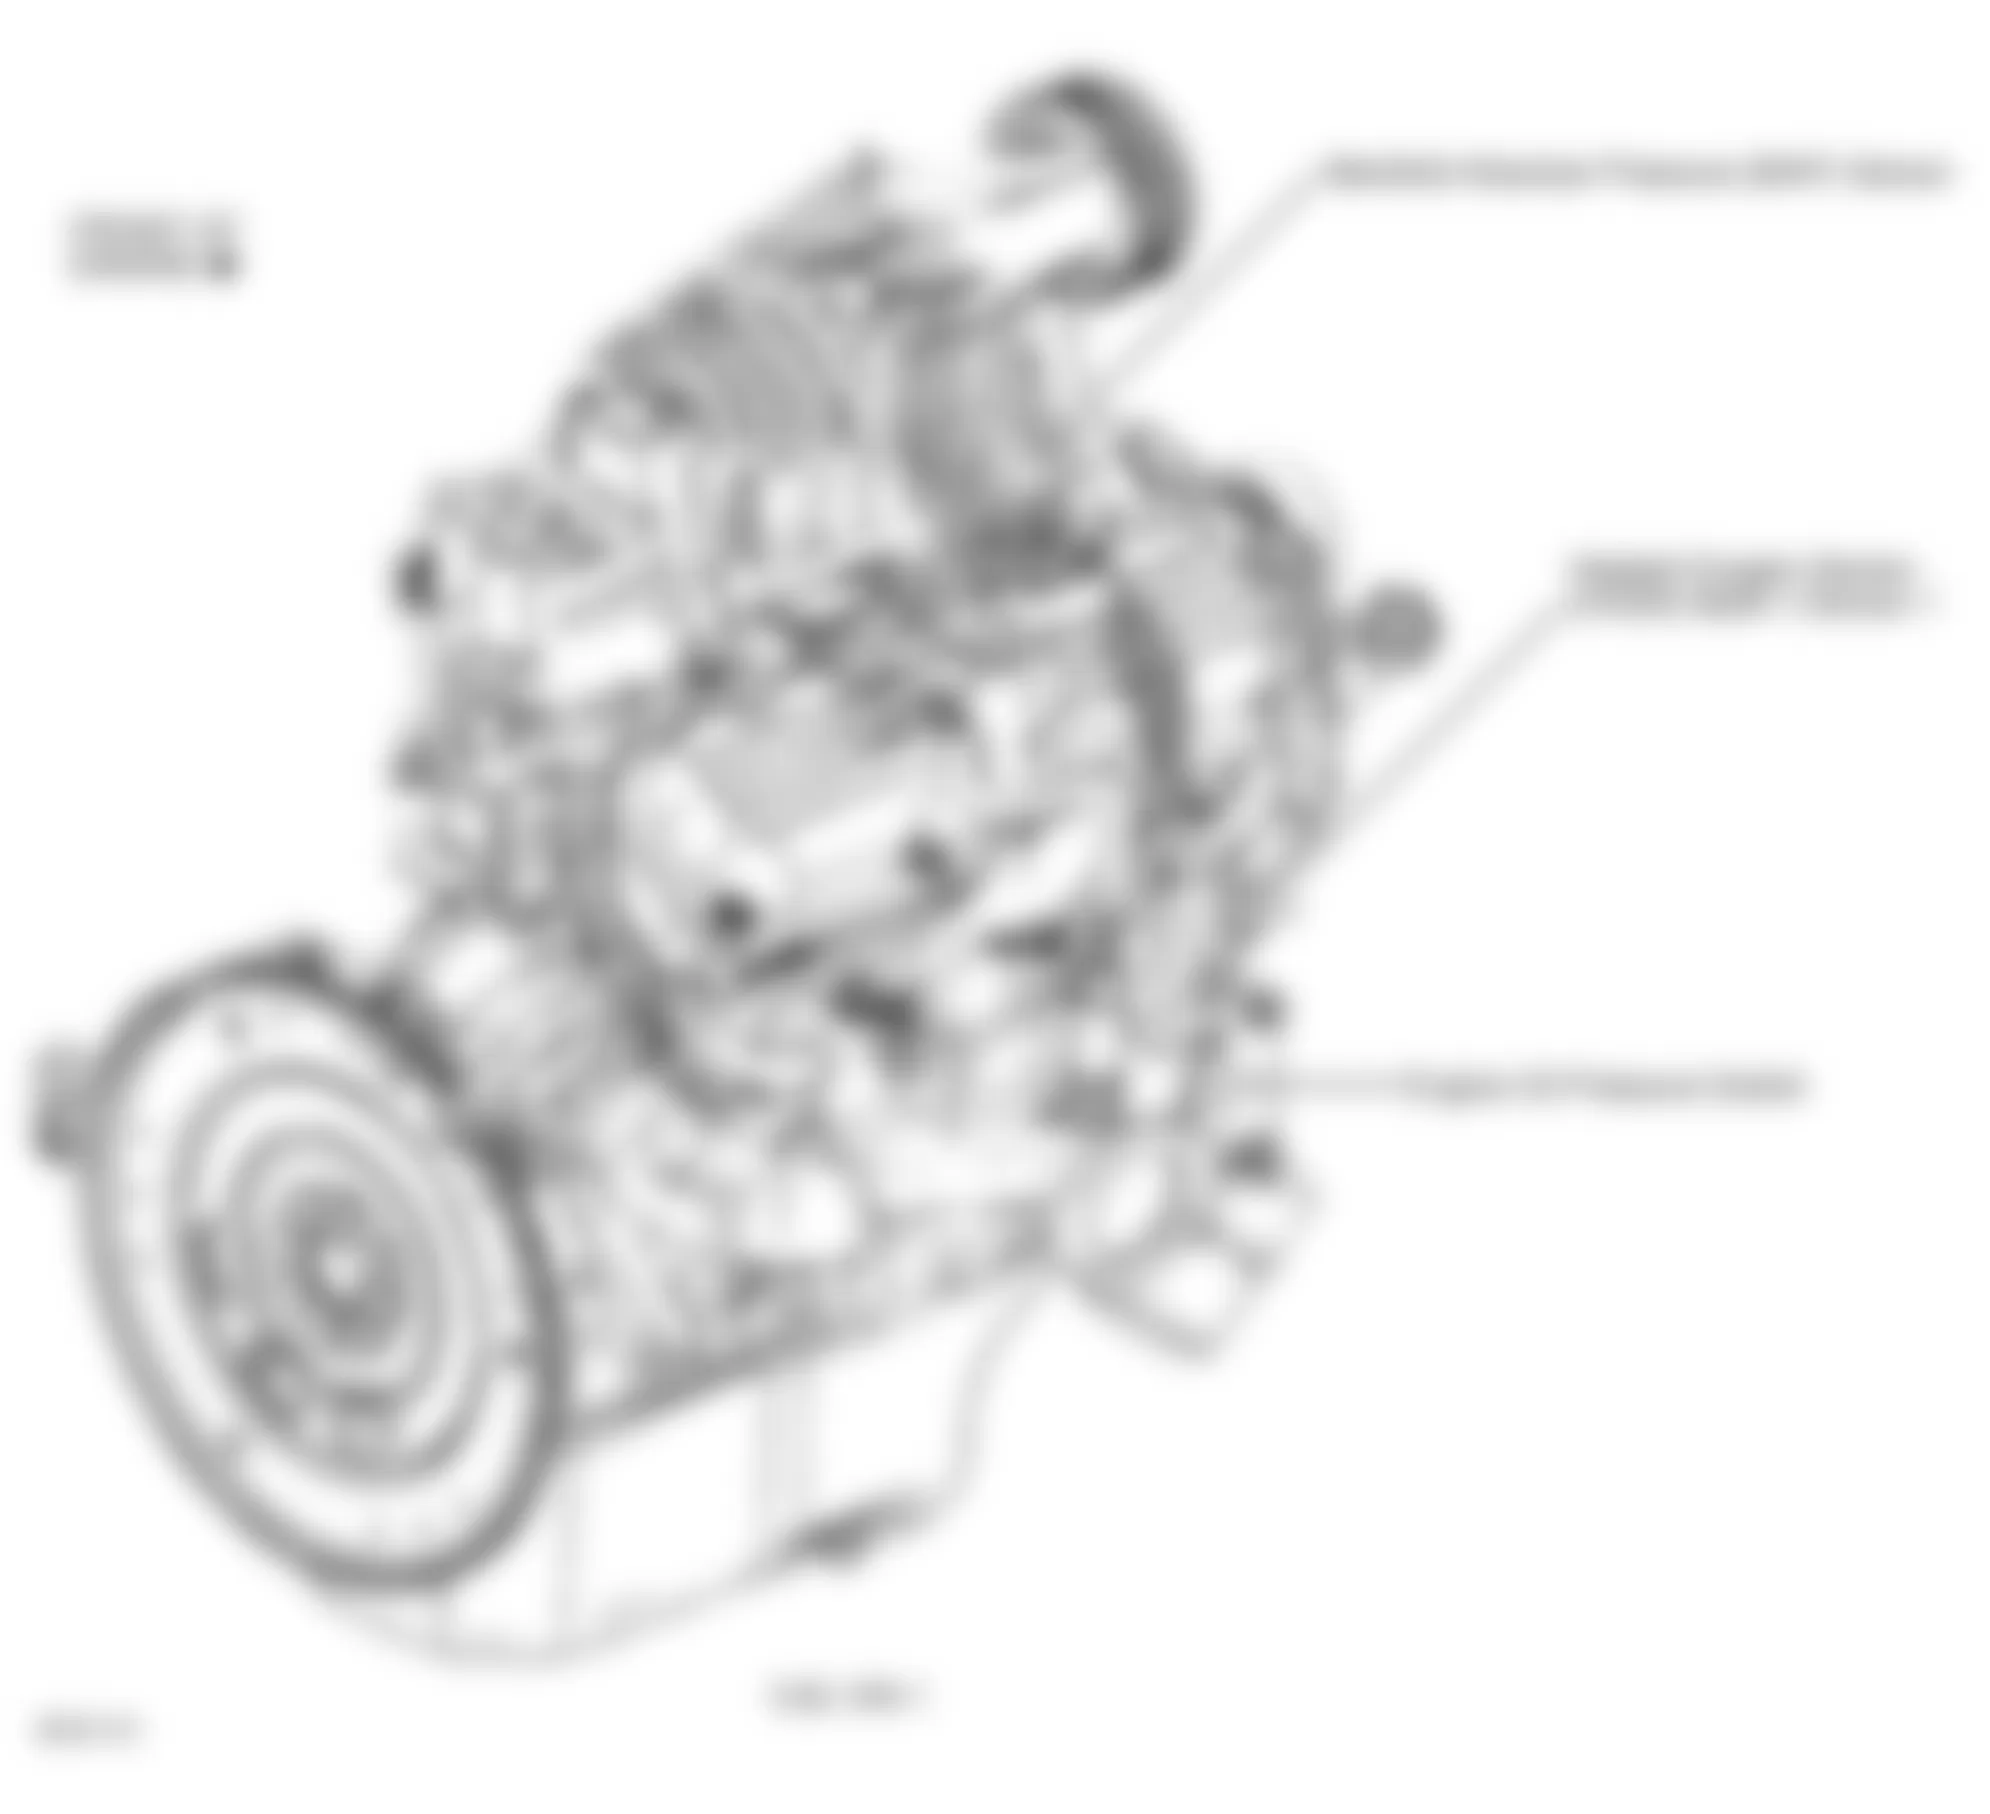 Buick LeSabre Limited 2001 - Component Locations -  Right Side Of Engine (3.8L VIN 1)